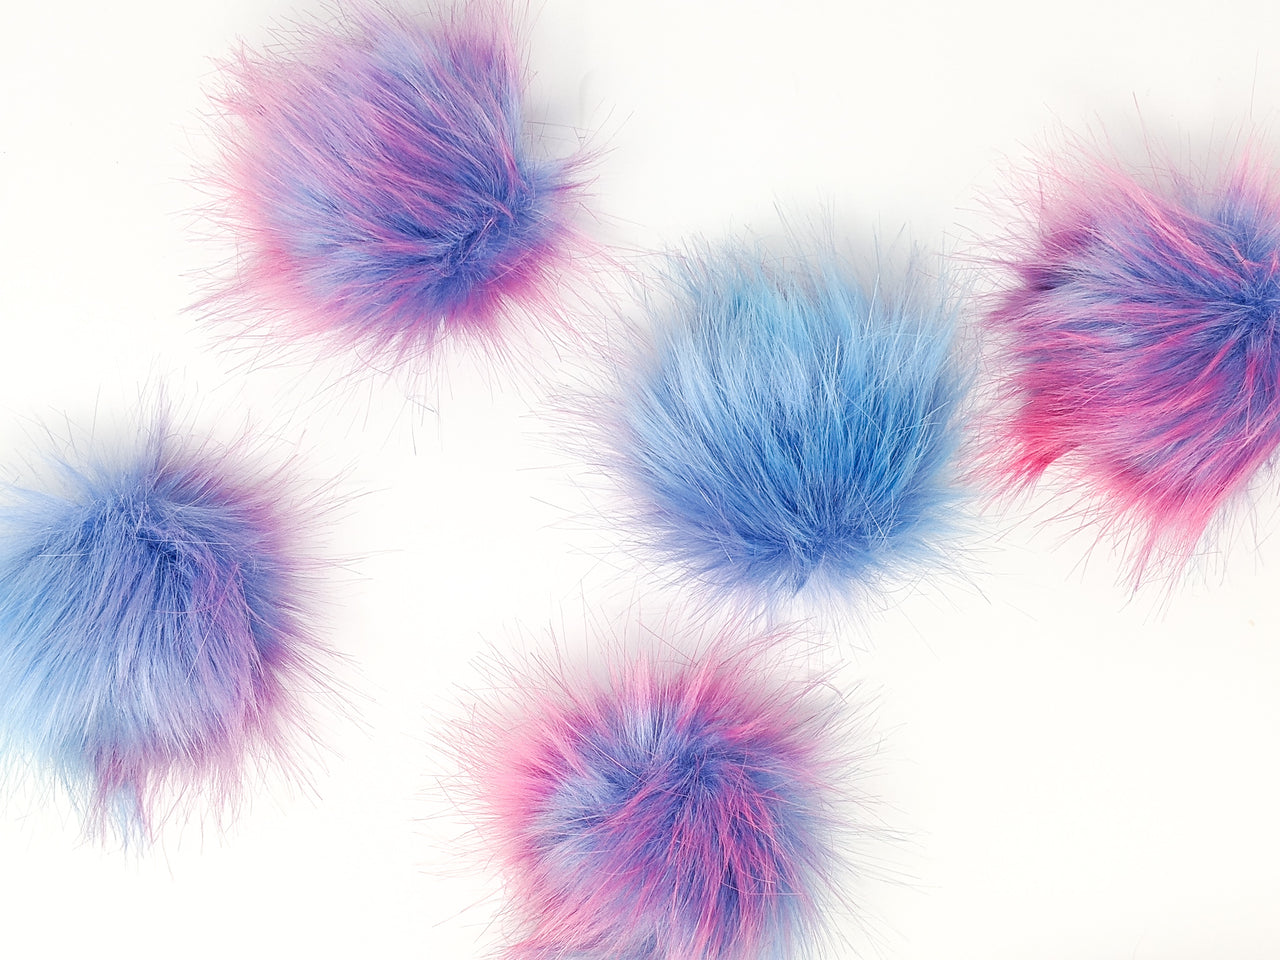 How to Make a Faux Fur Pom! (Video)